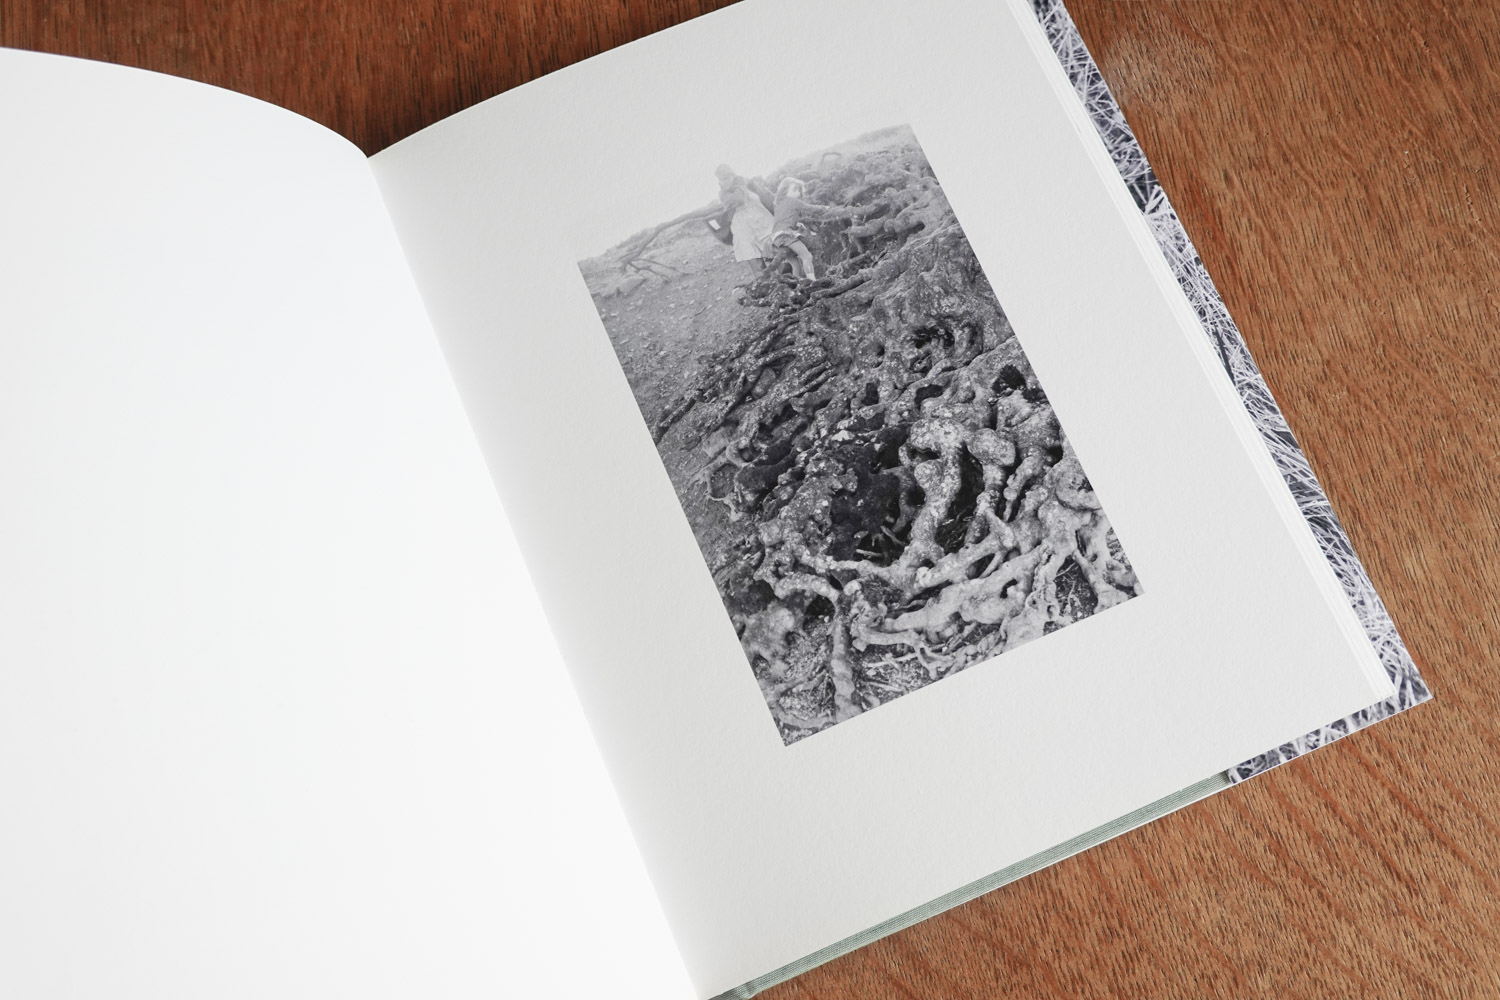 Photo of the book Oneiric open at a page showing a black and white photograph of a woman and child climbing down the roots of a tree.